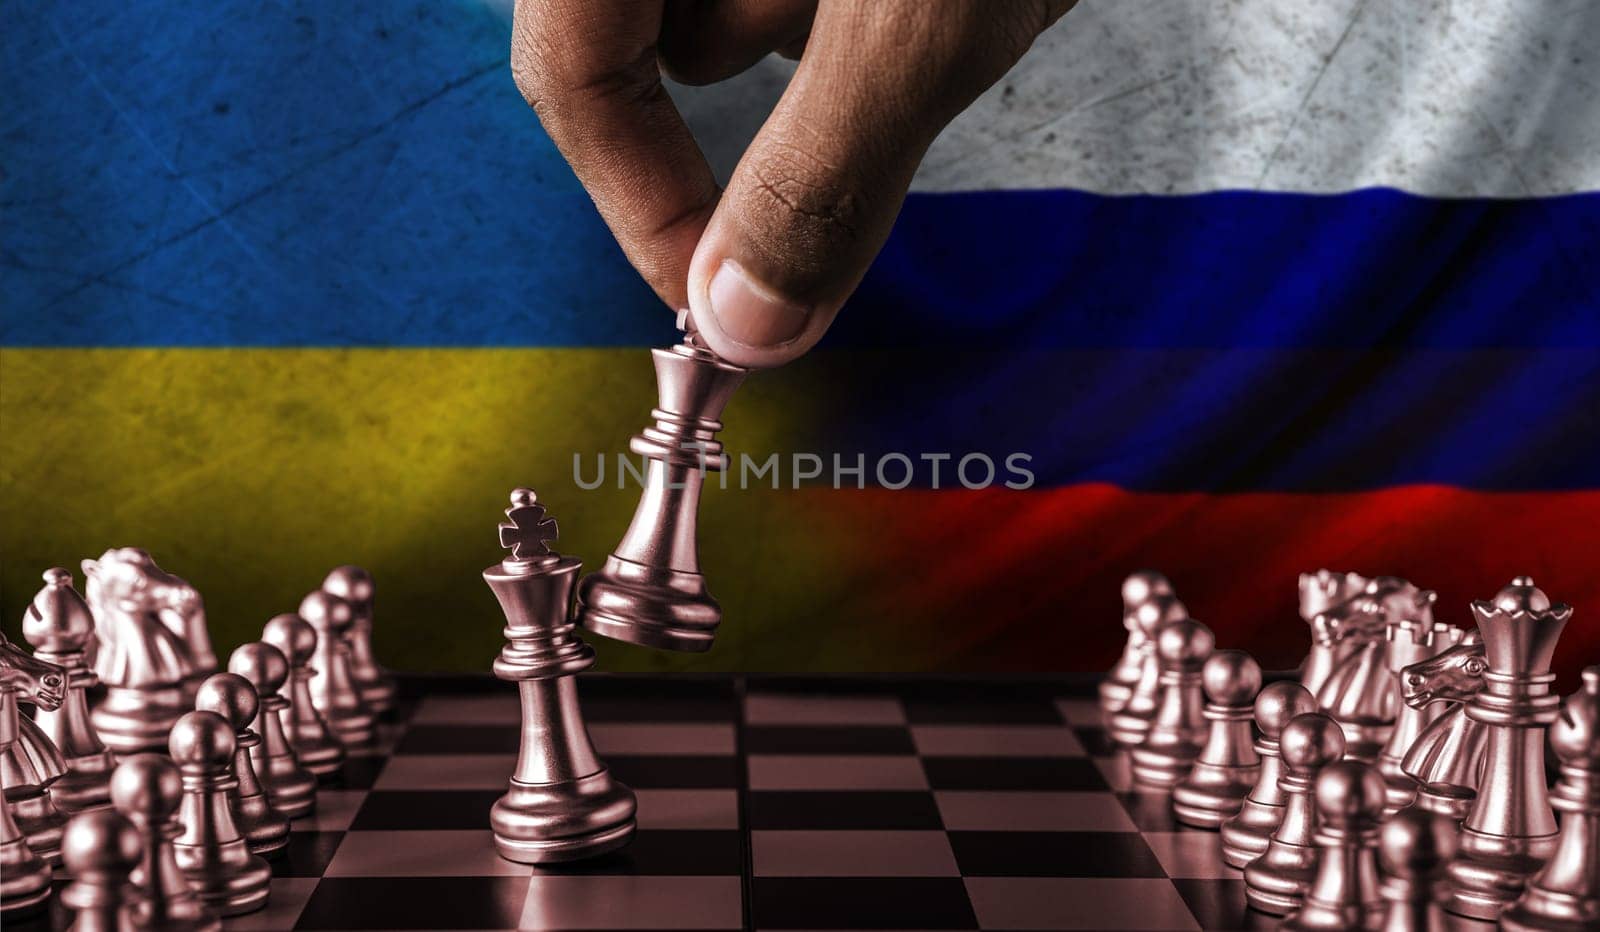 Russia vs Ukraine flag concept on chessboard. Political tension between Russia and Ukraine. Conflict between Russia and Ukraine over chess pieces by isaiphoto